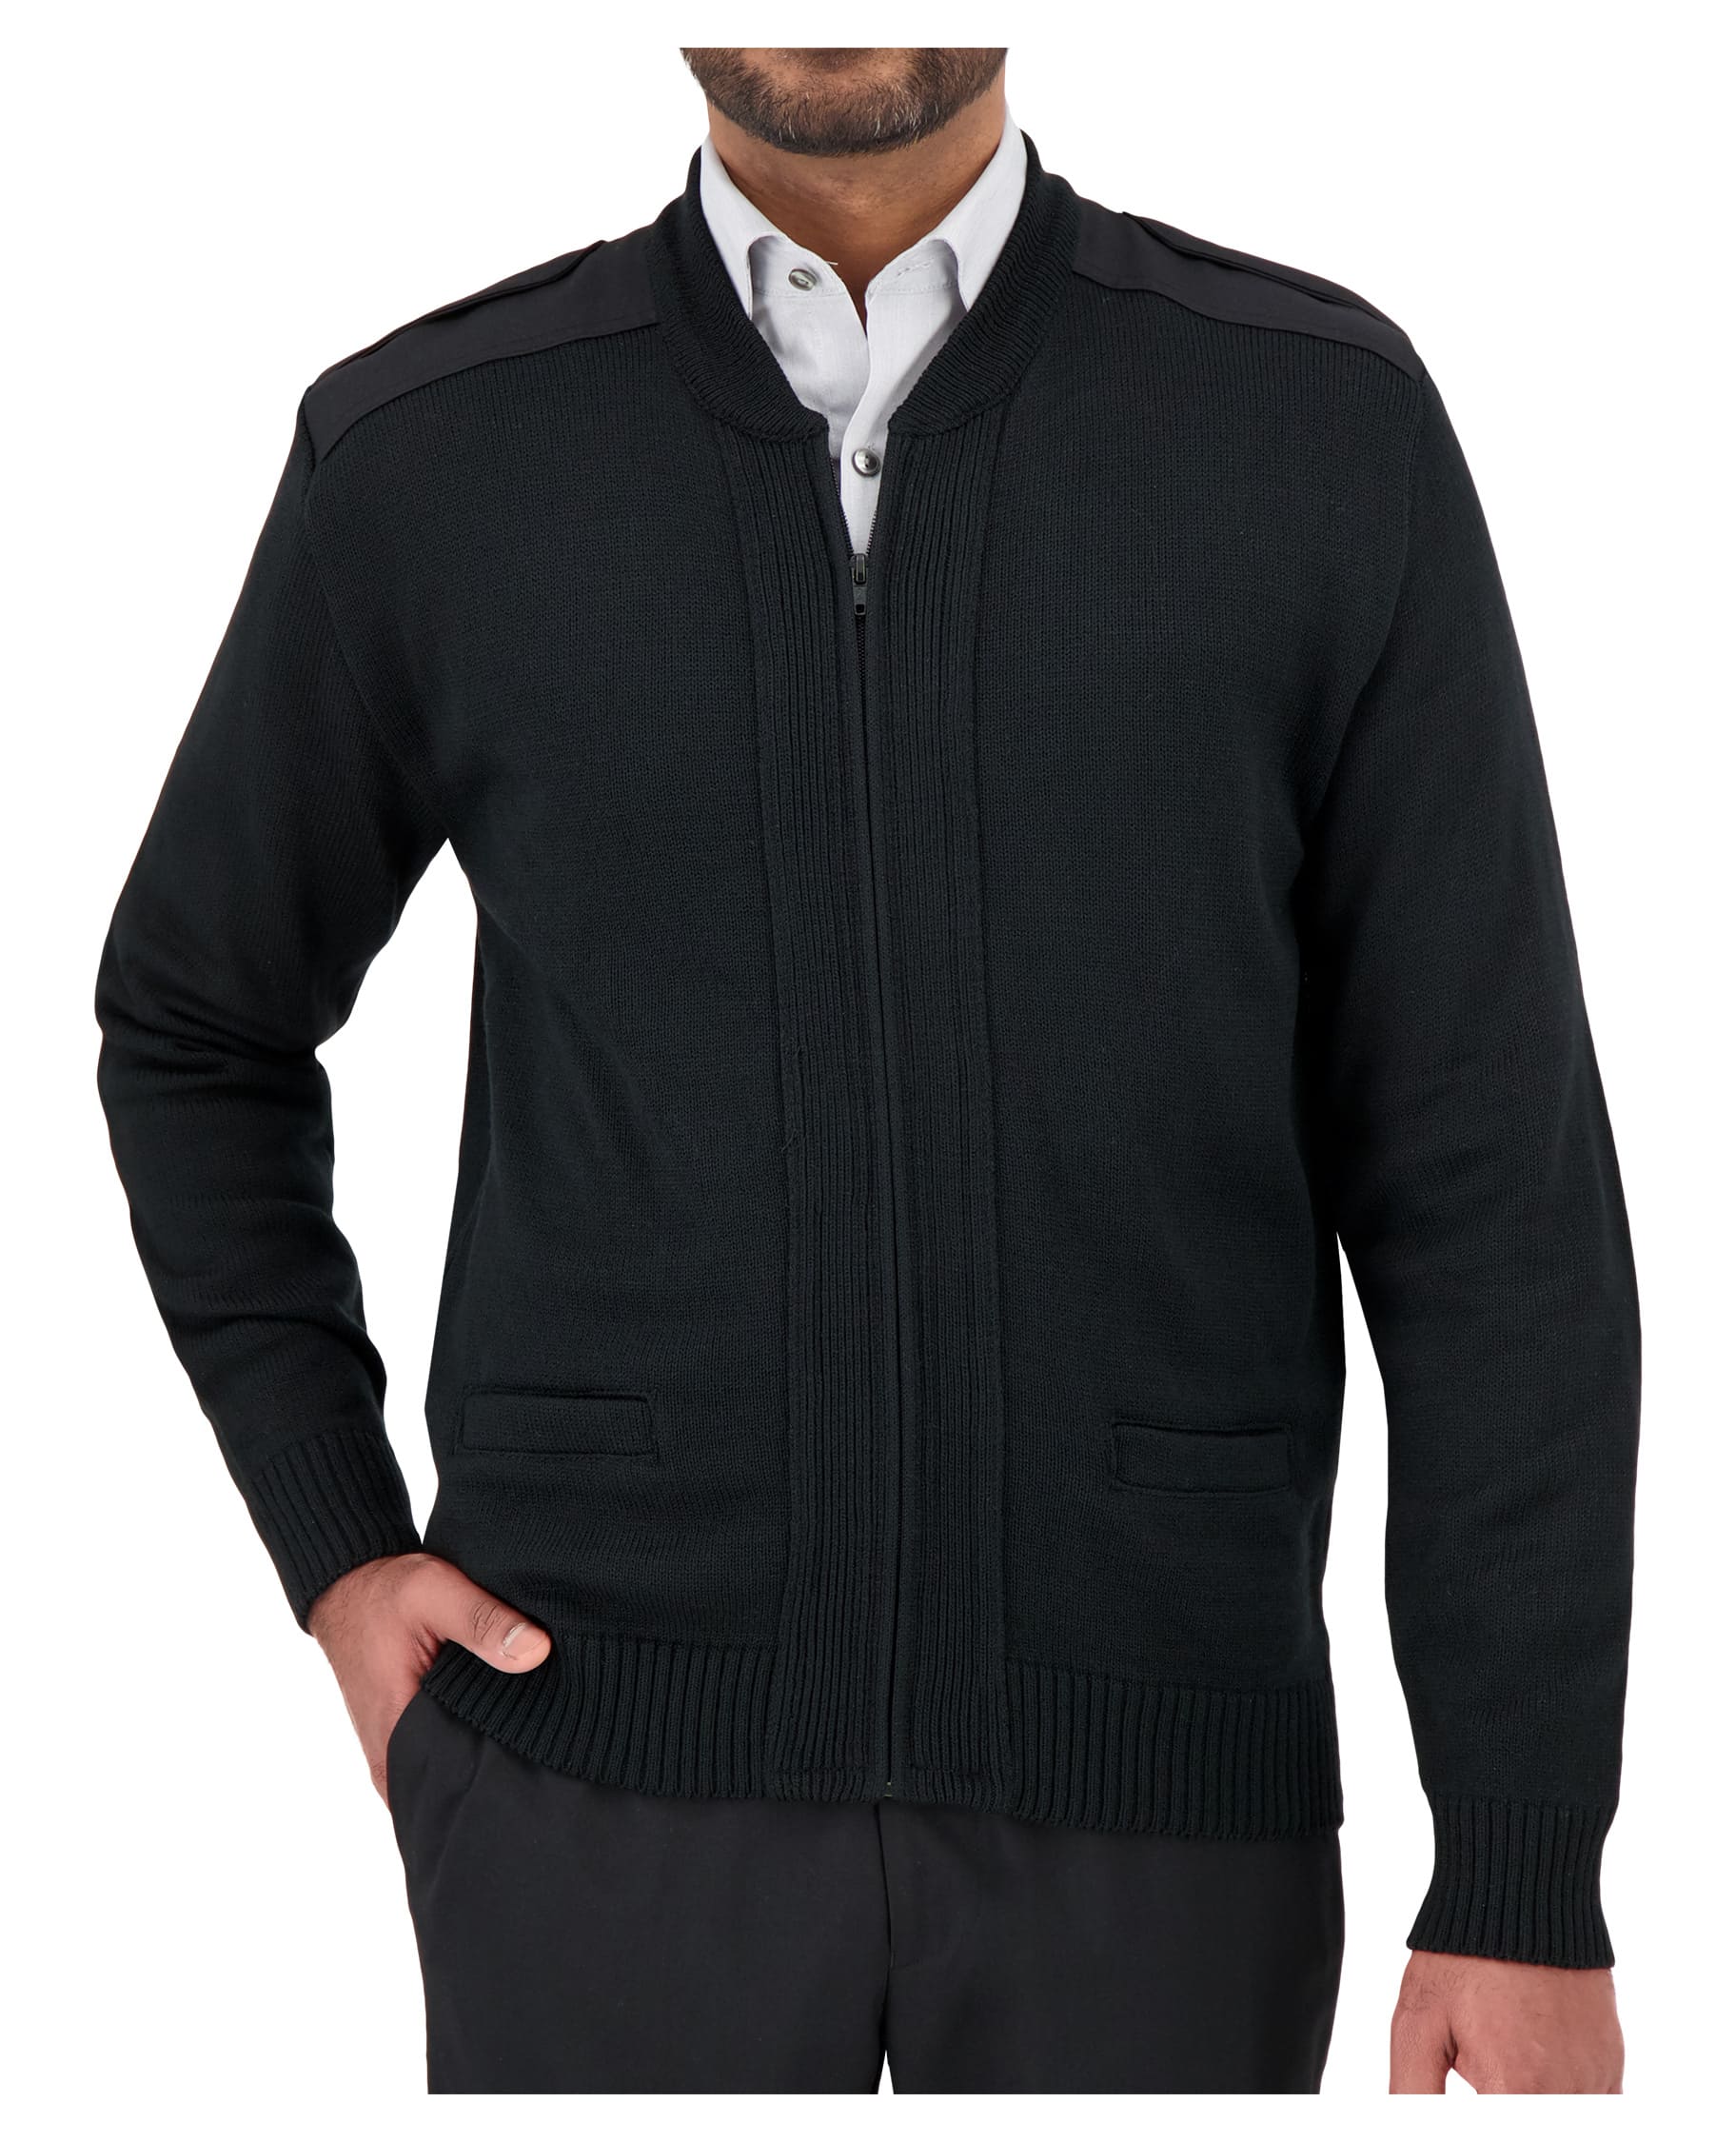 black crew neck zip up sweater with shoulder and elbow patches and pockets